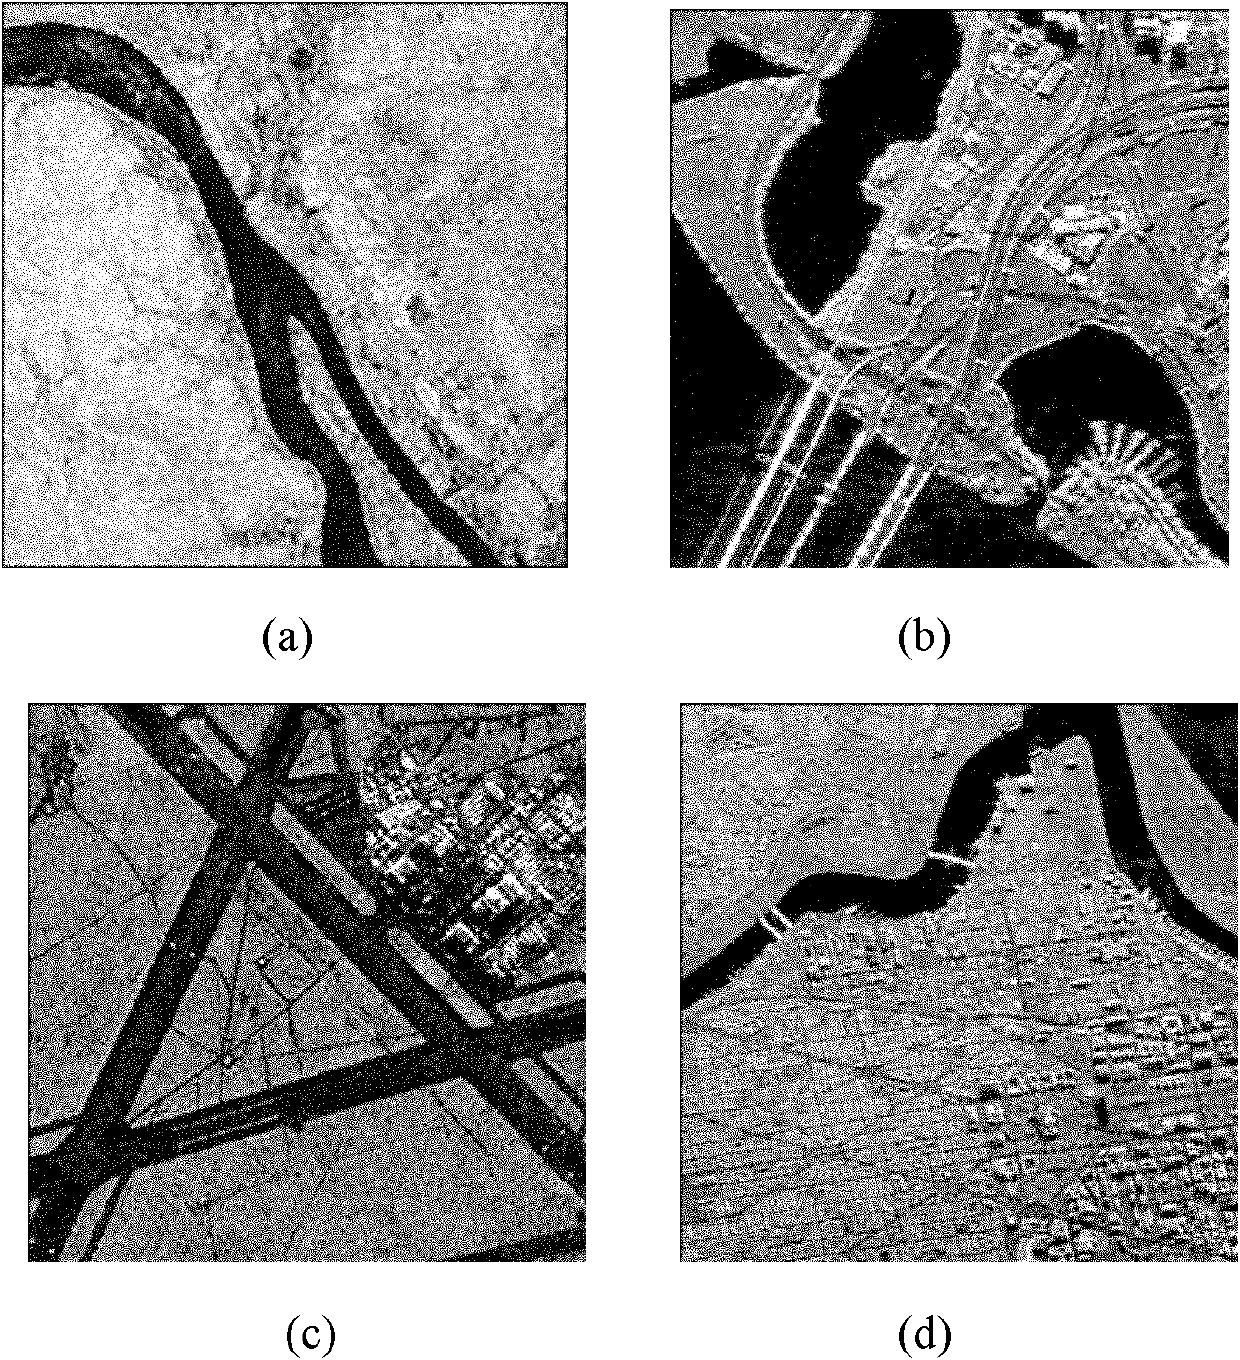 Level set SAR (Synthetic Aperture Radar) image segmentation method by combining edges and regional probability density difference